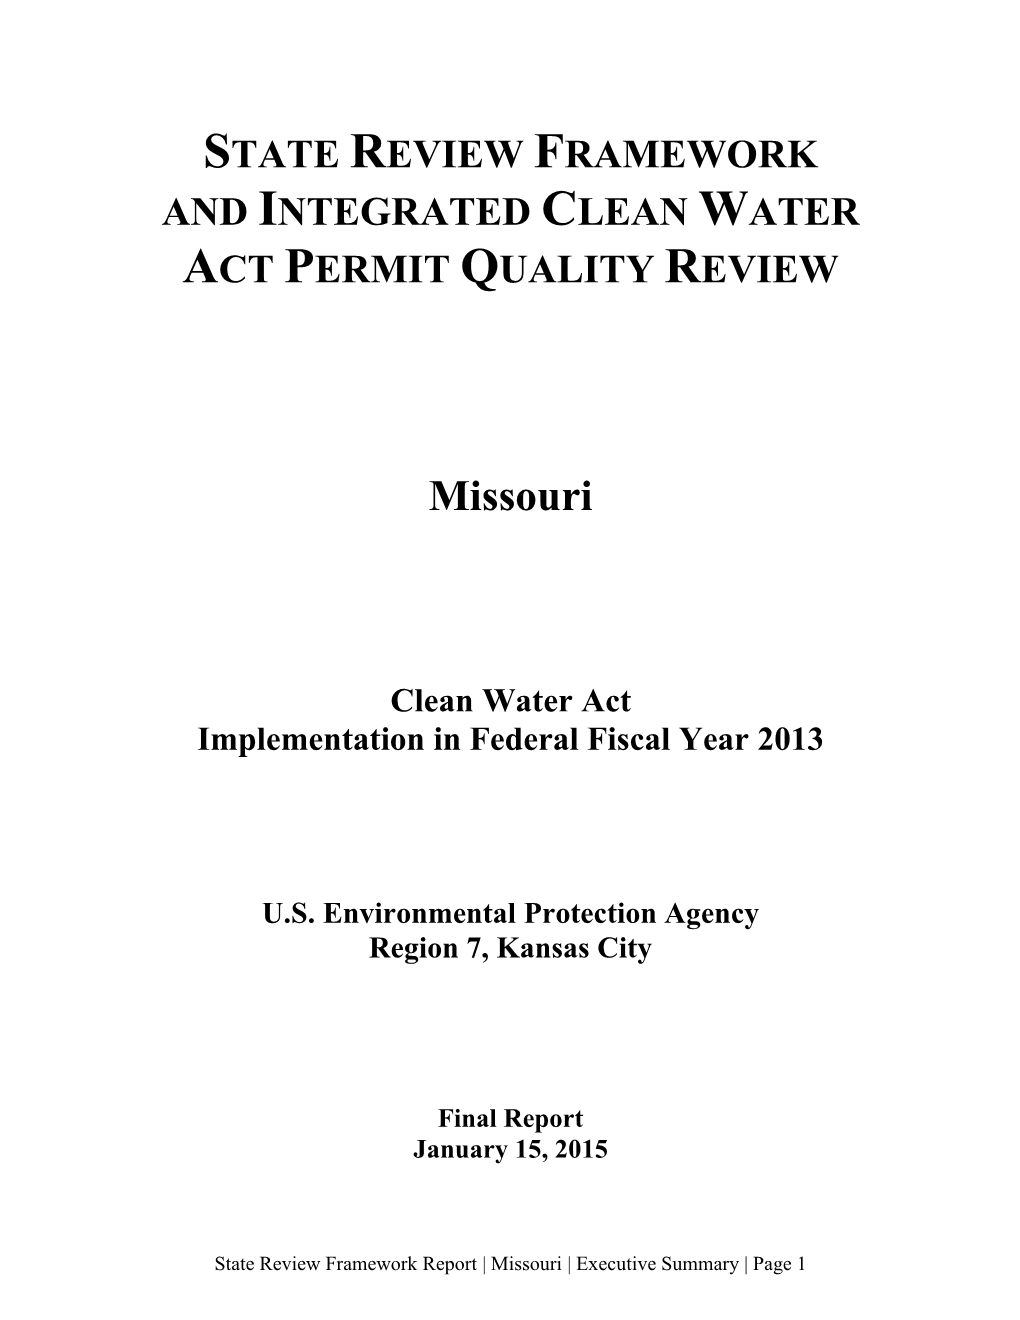 NPDES Permit Quality Review of Missouri